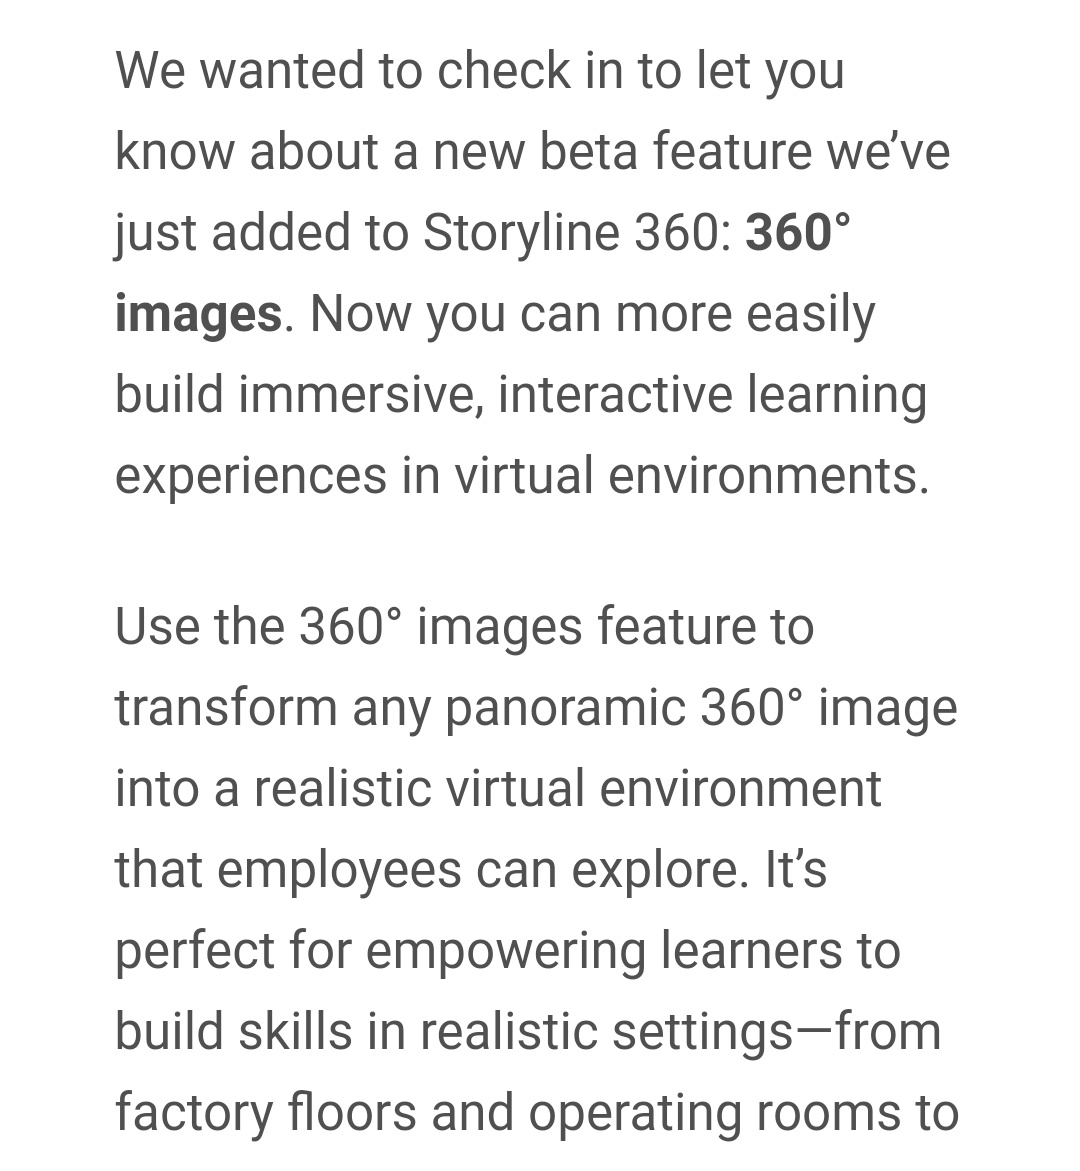 😛 When software sends you interesting feature they have added as beta, but you have been using software and feature since past few months 😂😜
Story of an #eLearningDeveloper or #InstructionalDesigner 😎
#eLearning #Articulate360 #Storyline360